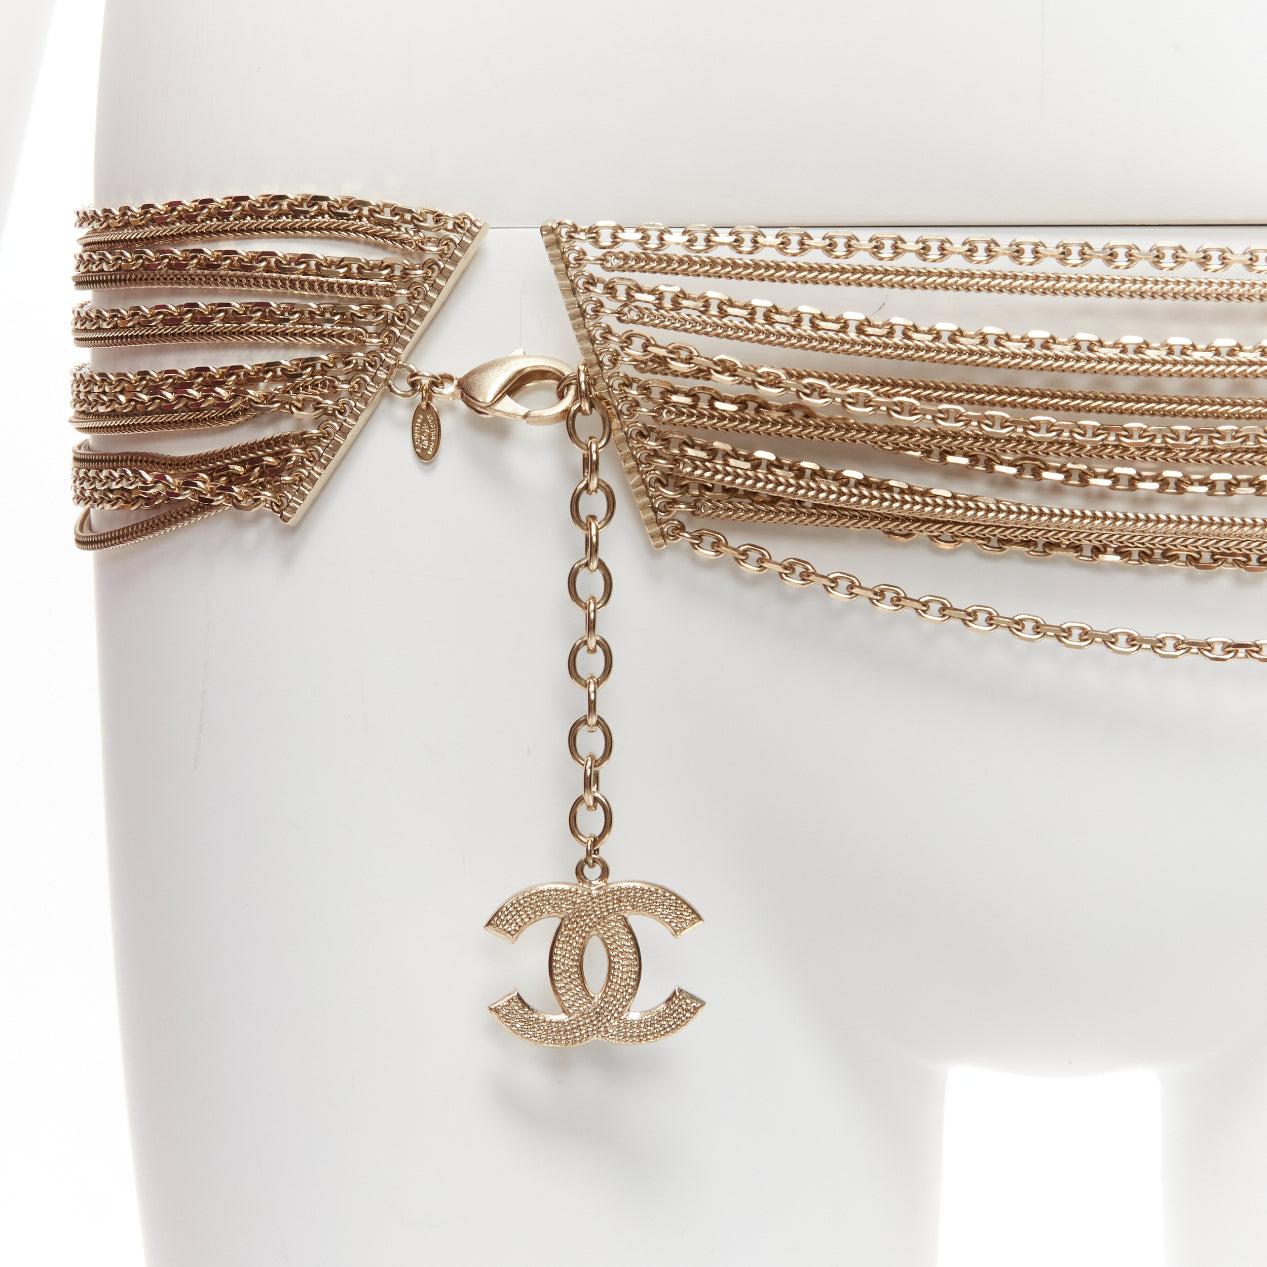 rare CHANEL 07P gold tone textured CC logo multi mixed chain low waist belt
Reference: GIYG/A00280
Brand: Chanel
Designer: Karl Lagerfeld
Collection: 07P
Material: Metal
Color: Gold
Pattern: Solid
Closure: Lobster Clasp
Extra Details: Multilayer